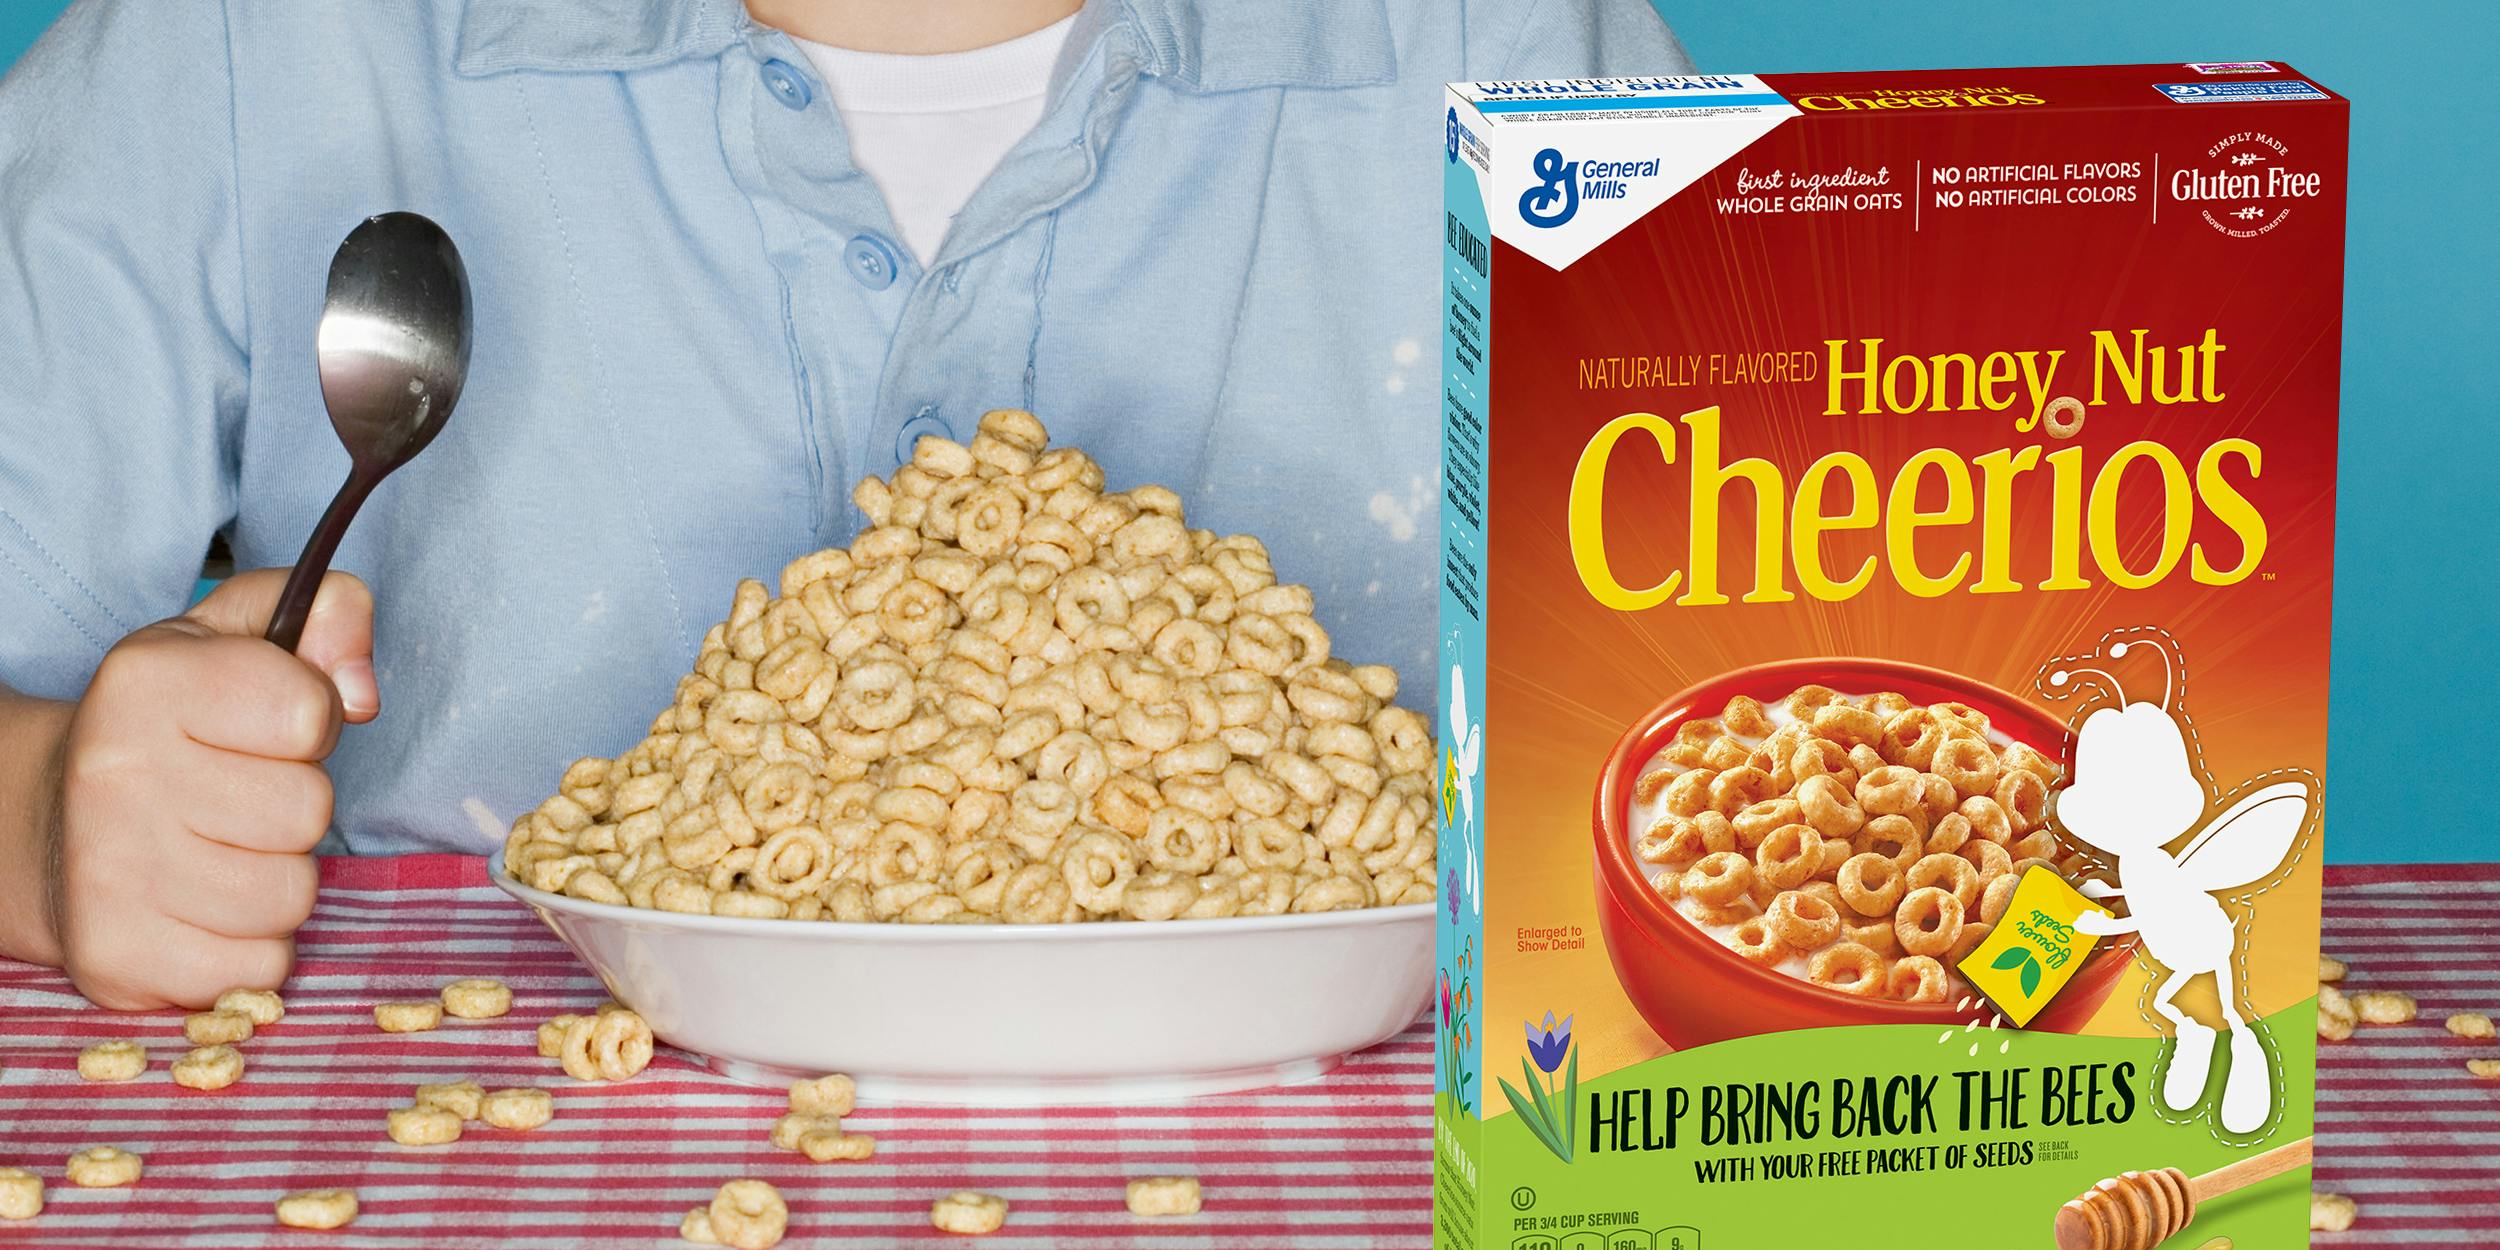 Honey Nut Cheerios Boxes No Longer Feature Buzz the Bee. Here's Why